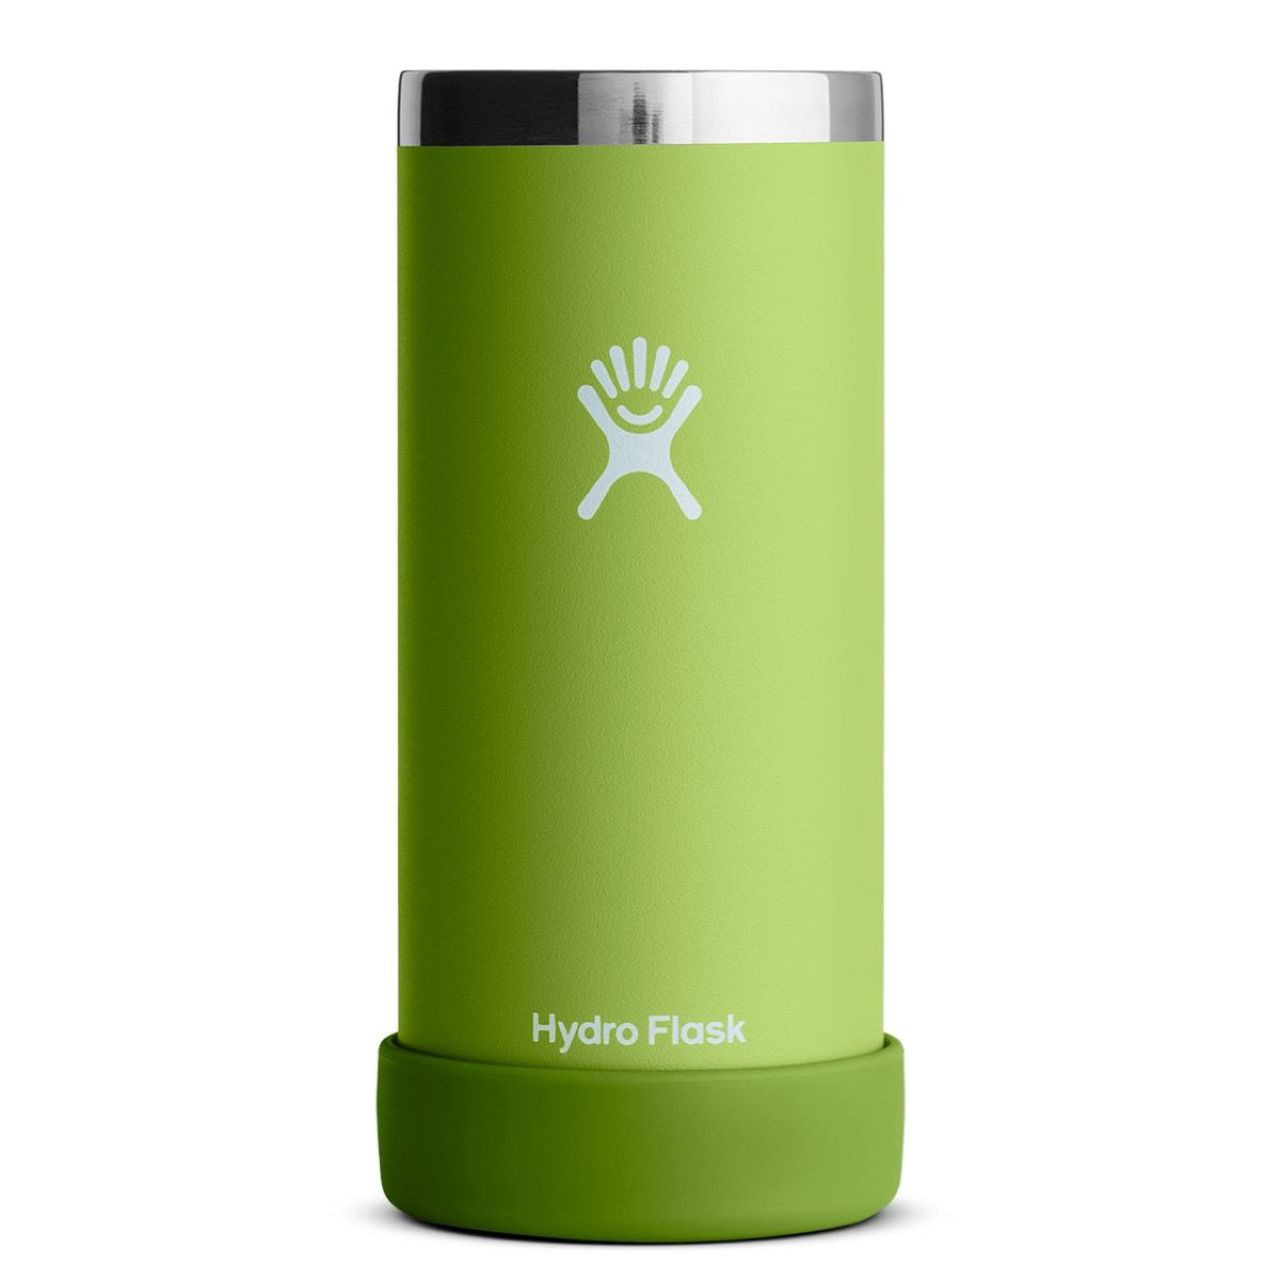 Hydroflask slim can cooler cup